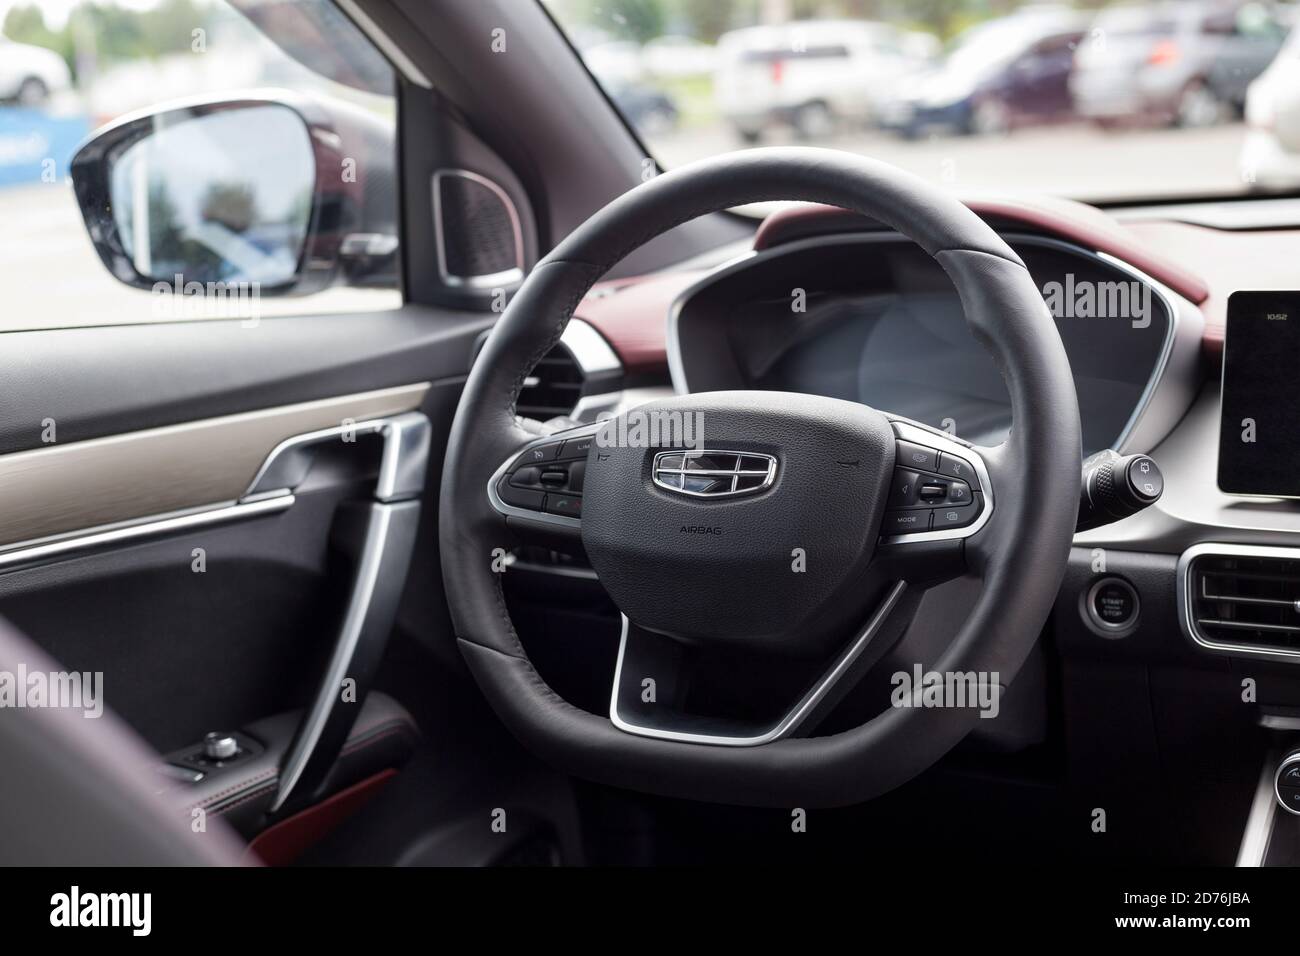 Russia, Izhevsk - August 14, 2020: Geely showroom. Steering wheel and interior of new modern CoolRay car. Car manufacturer from China. Stock Photo